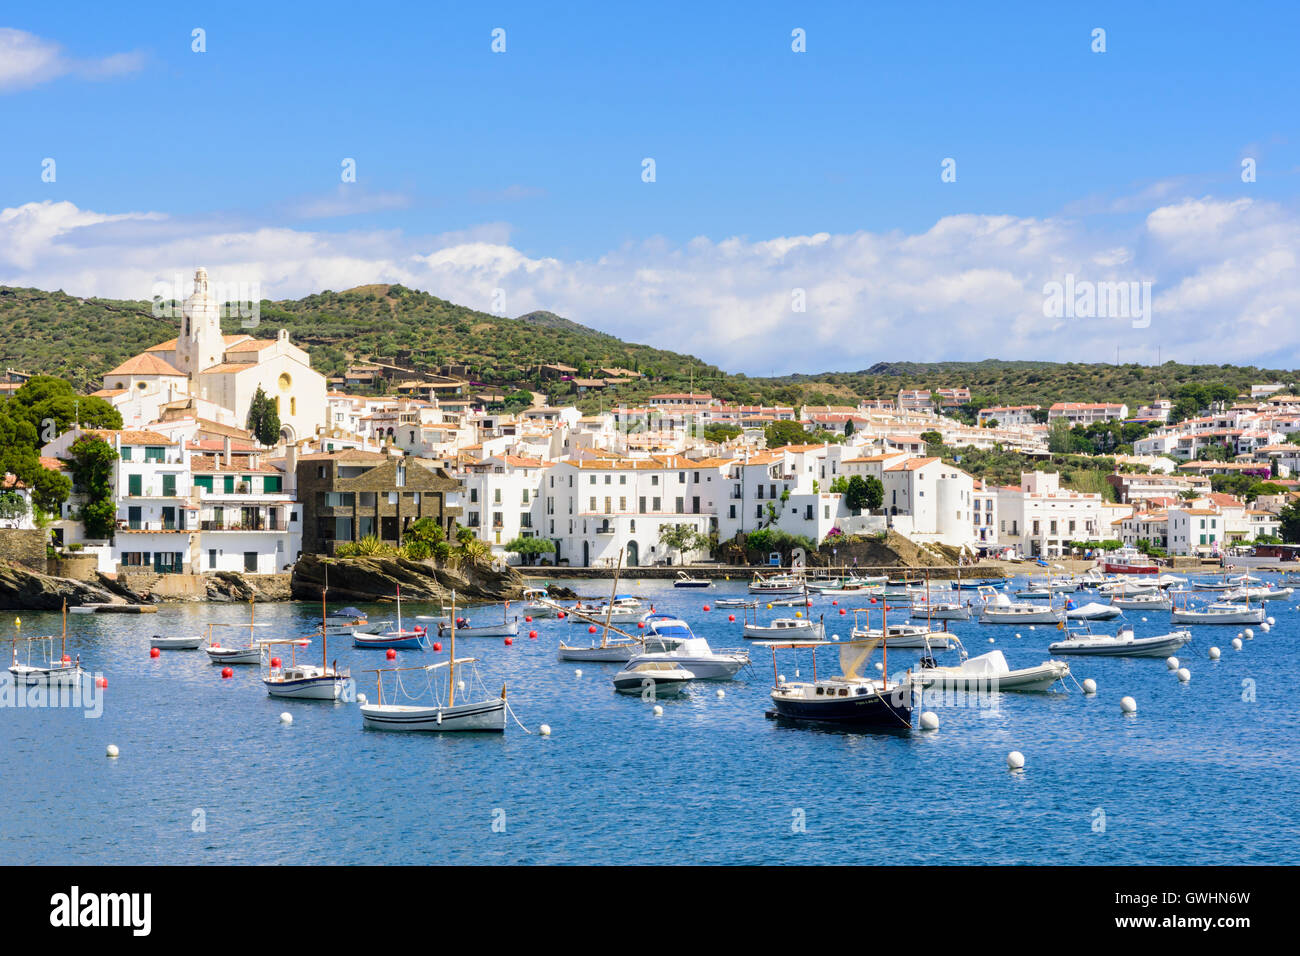 Whitewashed Cadaques town topped by the Church of Santa Maria overlooking boats in the blue waters of Cadaques Bay, Spain Stock Photo